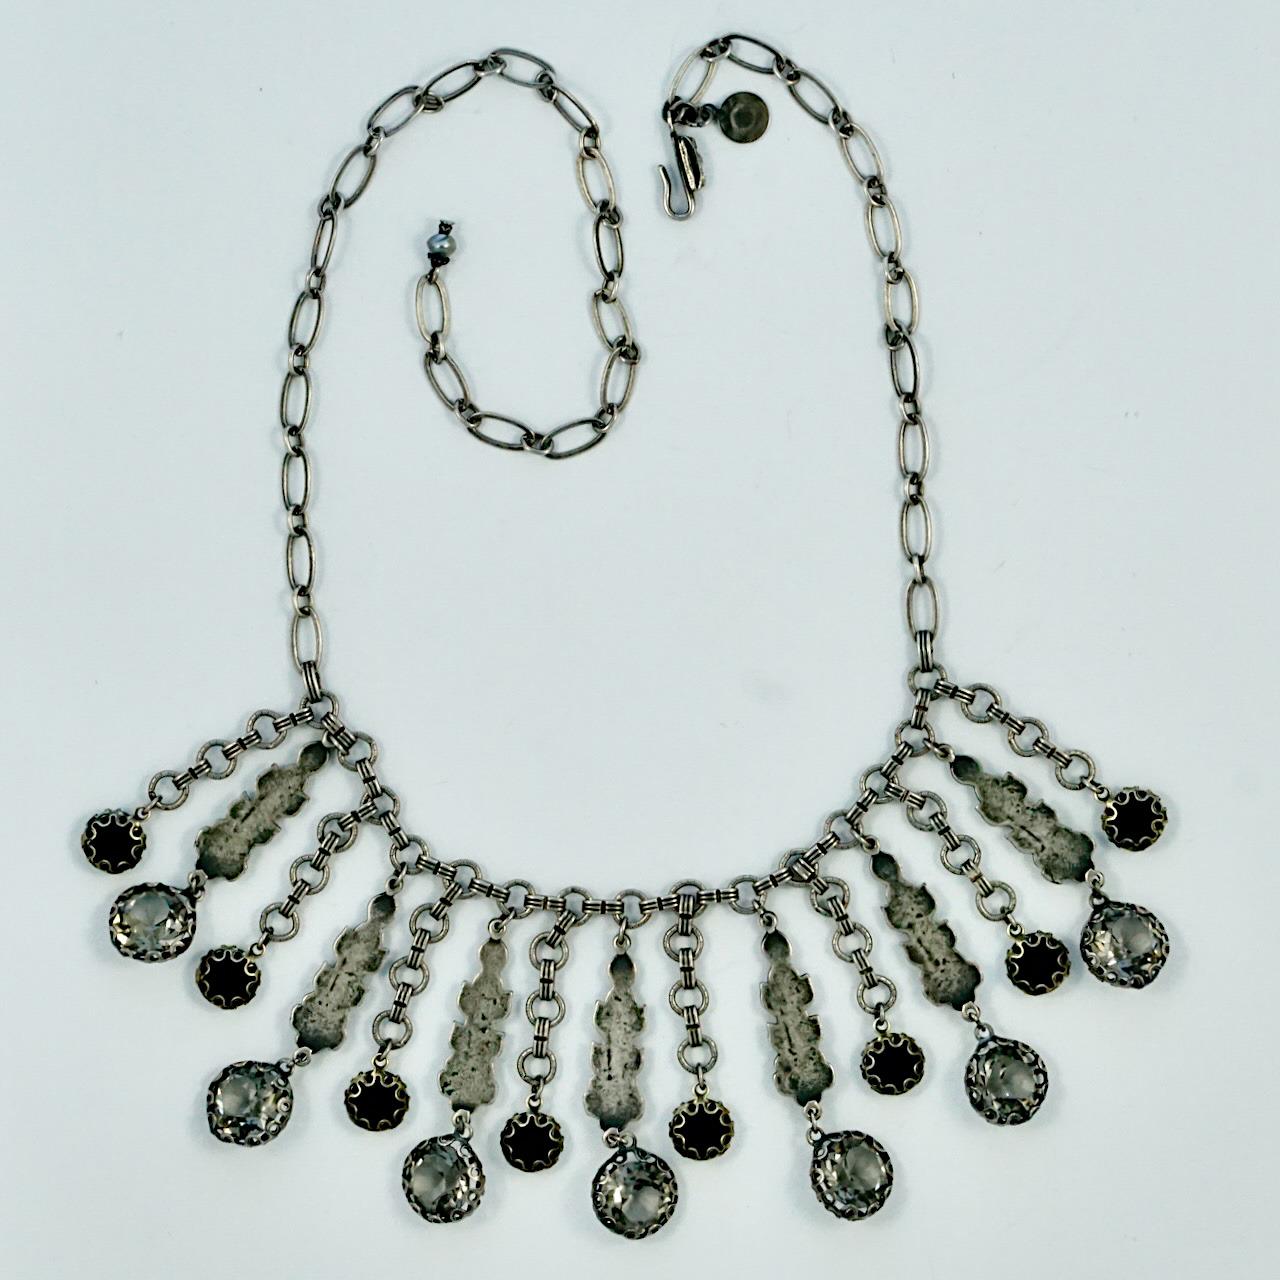 Women's or Men's Askew London Antiqued Silver Tone Drop Necklace Marcasites Rhinestones Pearls For Sale